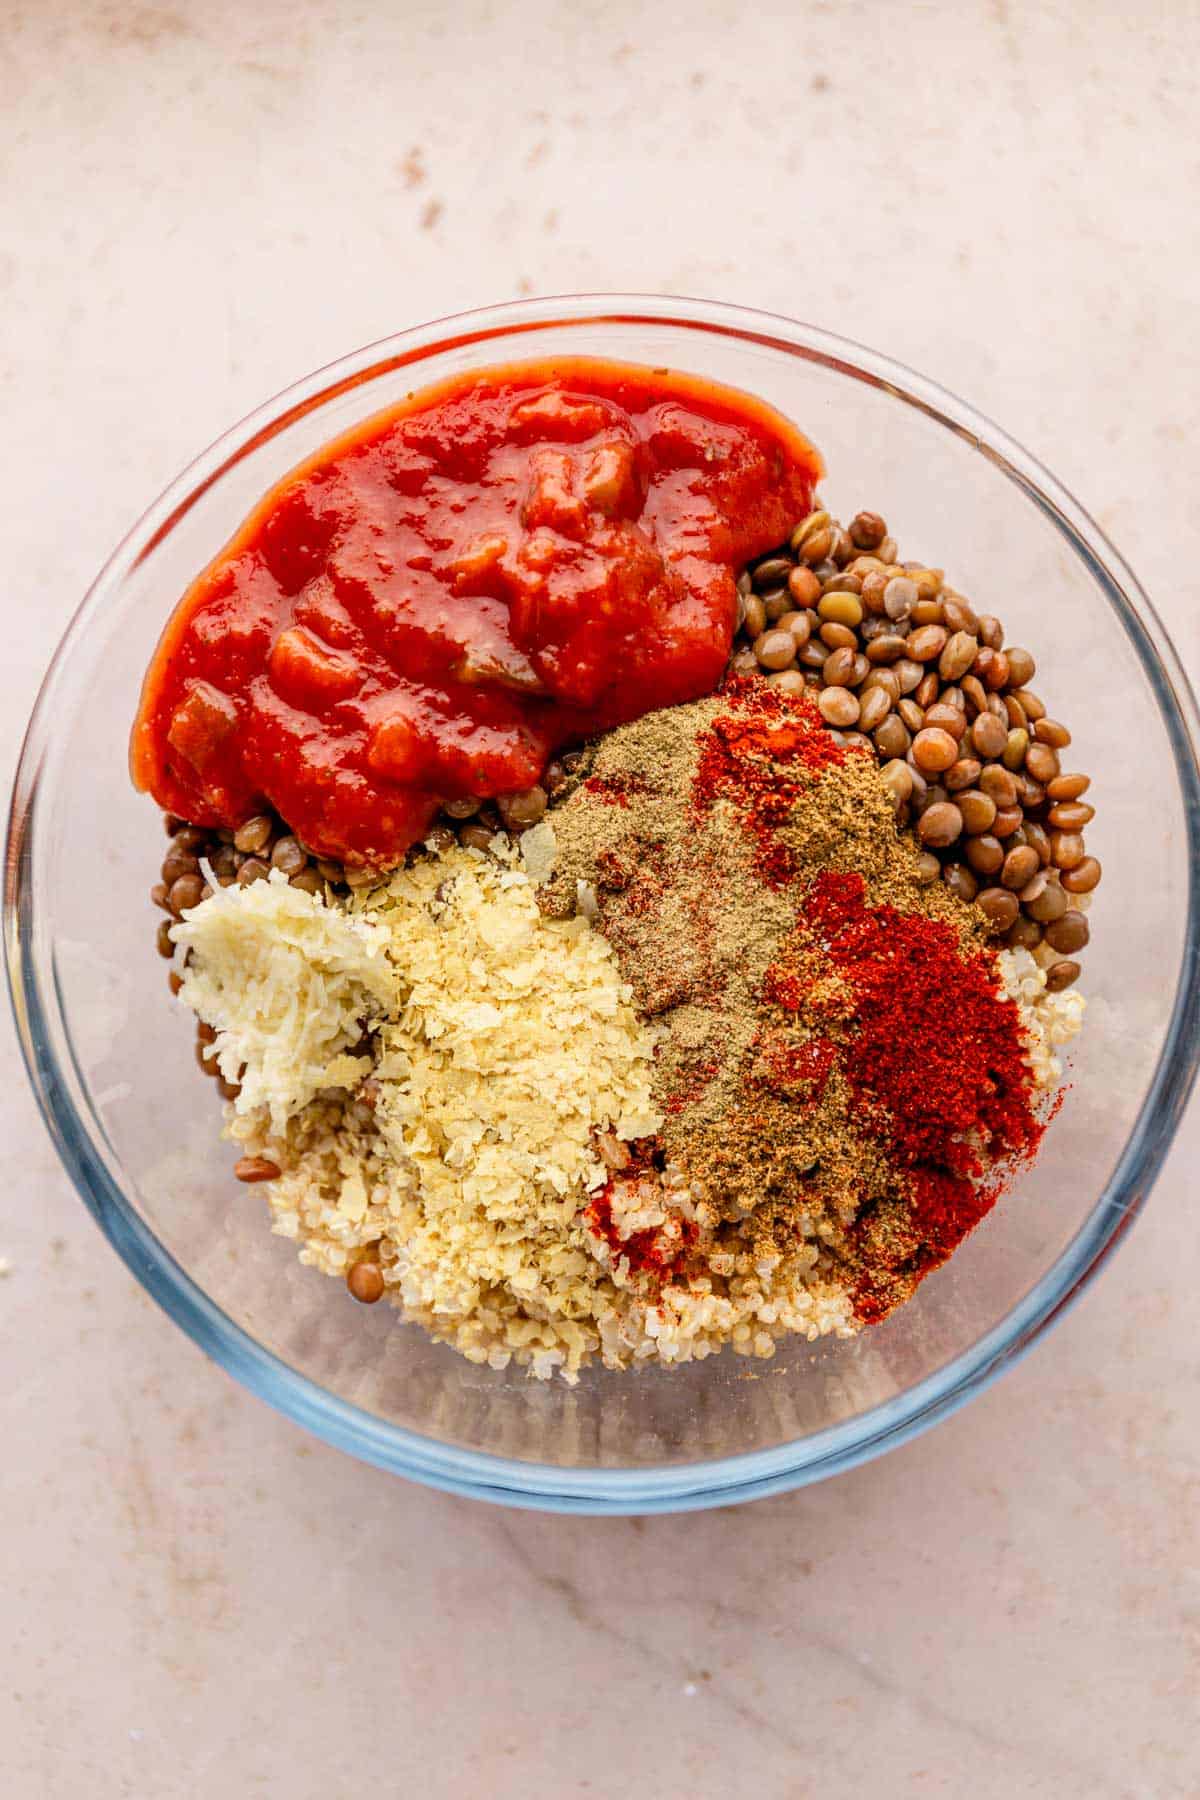 quinoa, lentils and seasoning in a bowl.